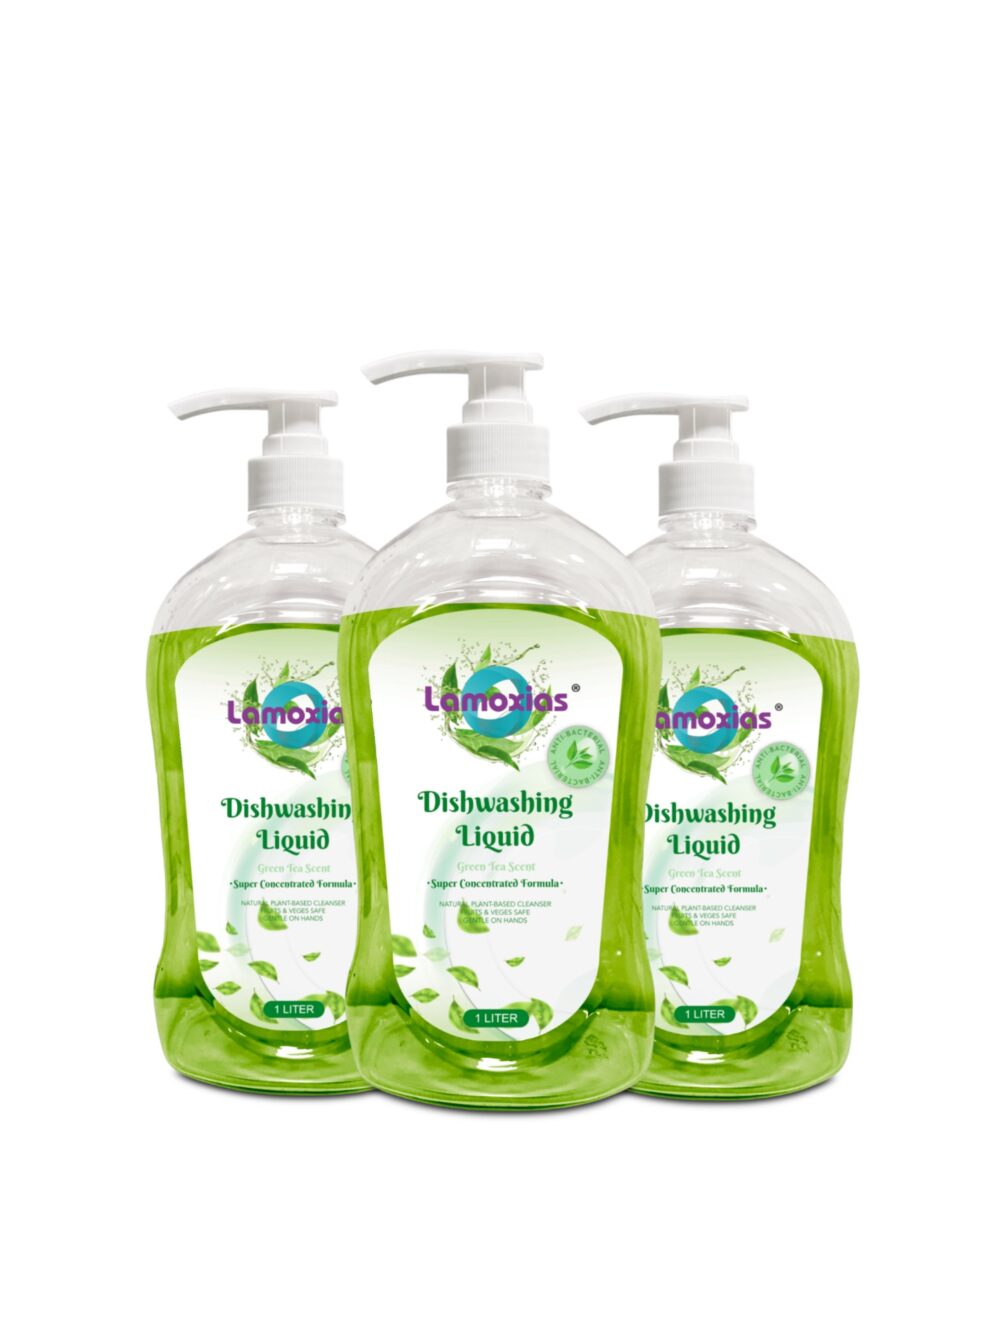 Bundle Deal. Get 2 or 3 of the perfect dishwashing liquid for daily use. Actual Green-Tea infused liquid that not only moisturises your hands while washing, but also safe to wash your fruits and vegetables.